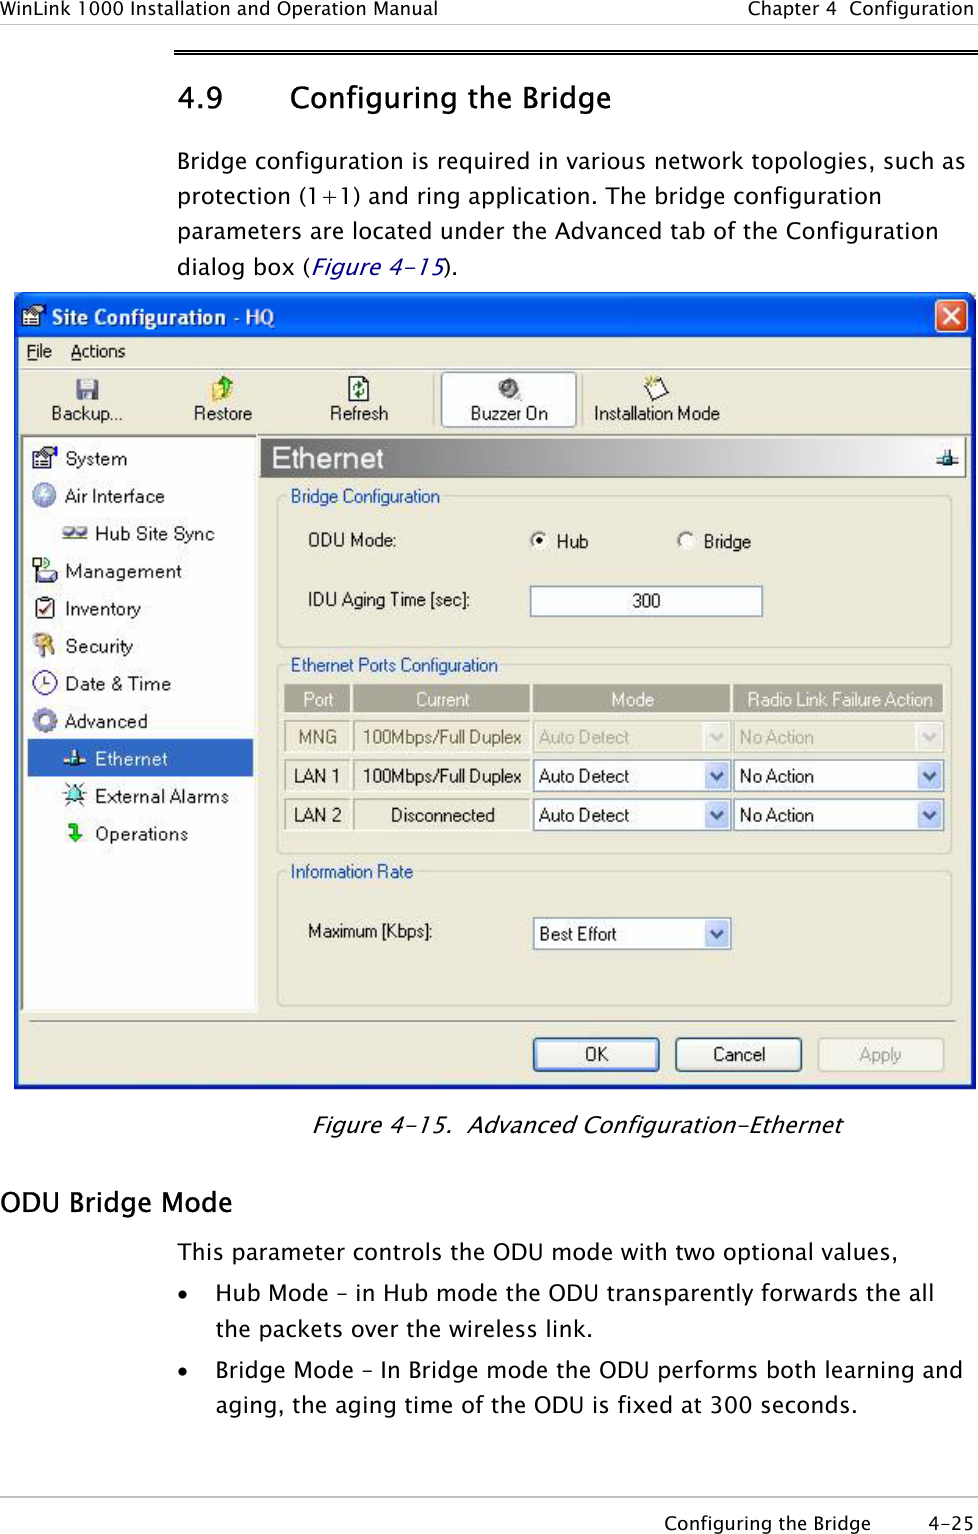 WinLink 1000 Installation and Operation Manual  Chapter  4  Configuration 4.9 Configuring the Bridge  Bridge configuration is required in various network topologies, such as protection (1+1) and ring application. The bridge configuration parameters are located under the Advanced tab of the Configuration dialog box (Figure  4-15).   Figure  4-15.  Advanced Configu ation-Ethernet rODU Bridge Mode This parameter controls the ODU mode with two optional values,  • Hub Mode – in Hub mode the ODU transparently forwards the all the packets over the wireless link. • Bridge Mode – In Bridge mode the ODU performs both learning and aging, the aging time of the ODU is fixed at 300 seconds.  Configuring the Bridge  4-25 